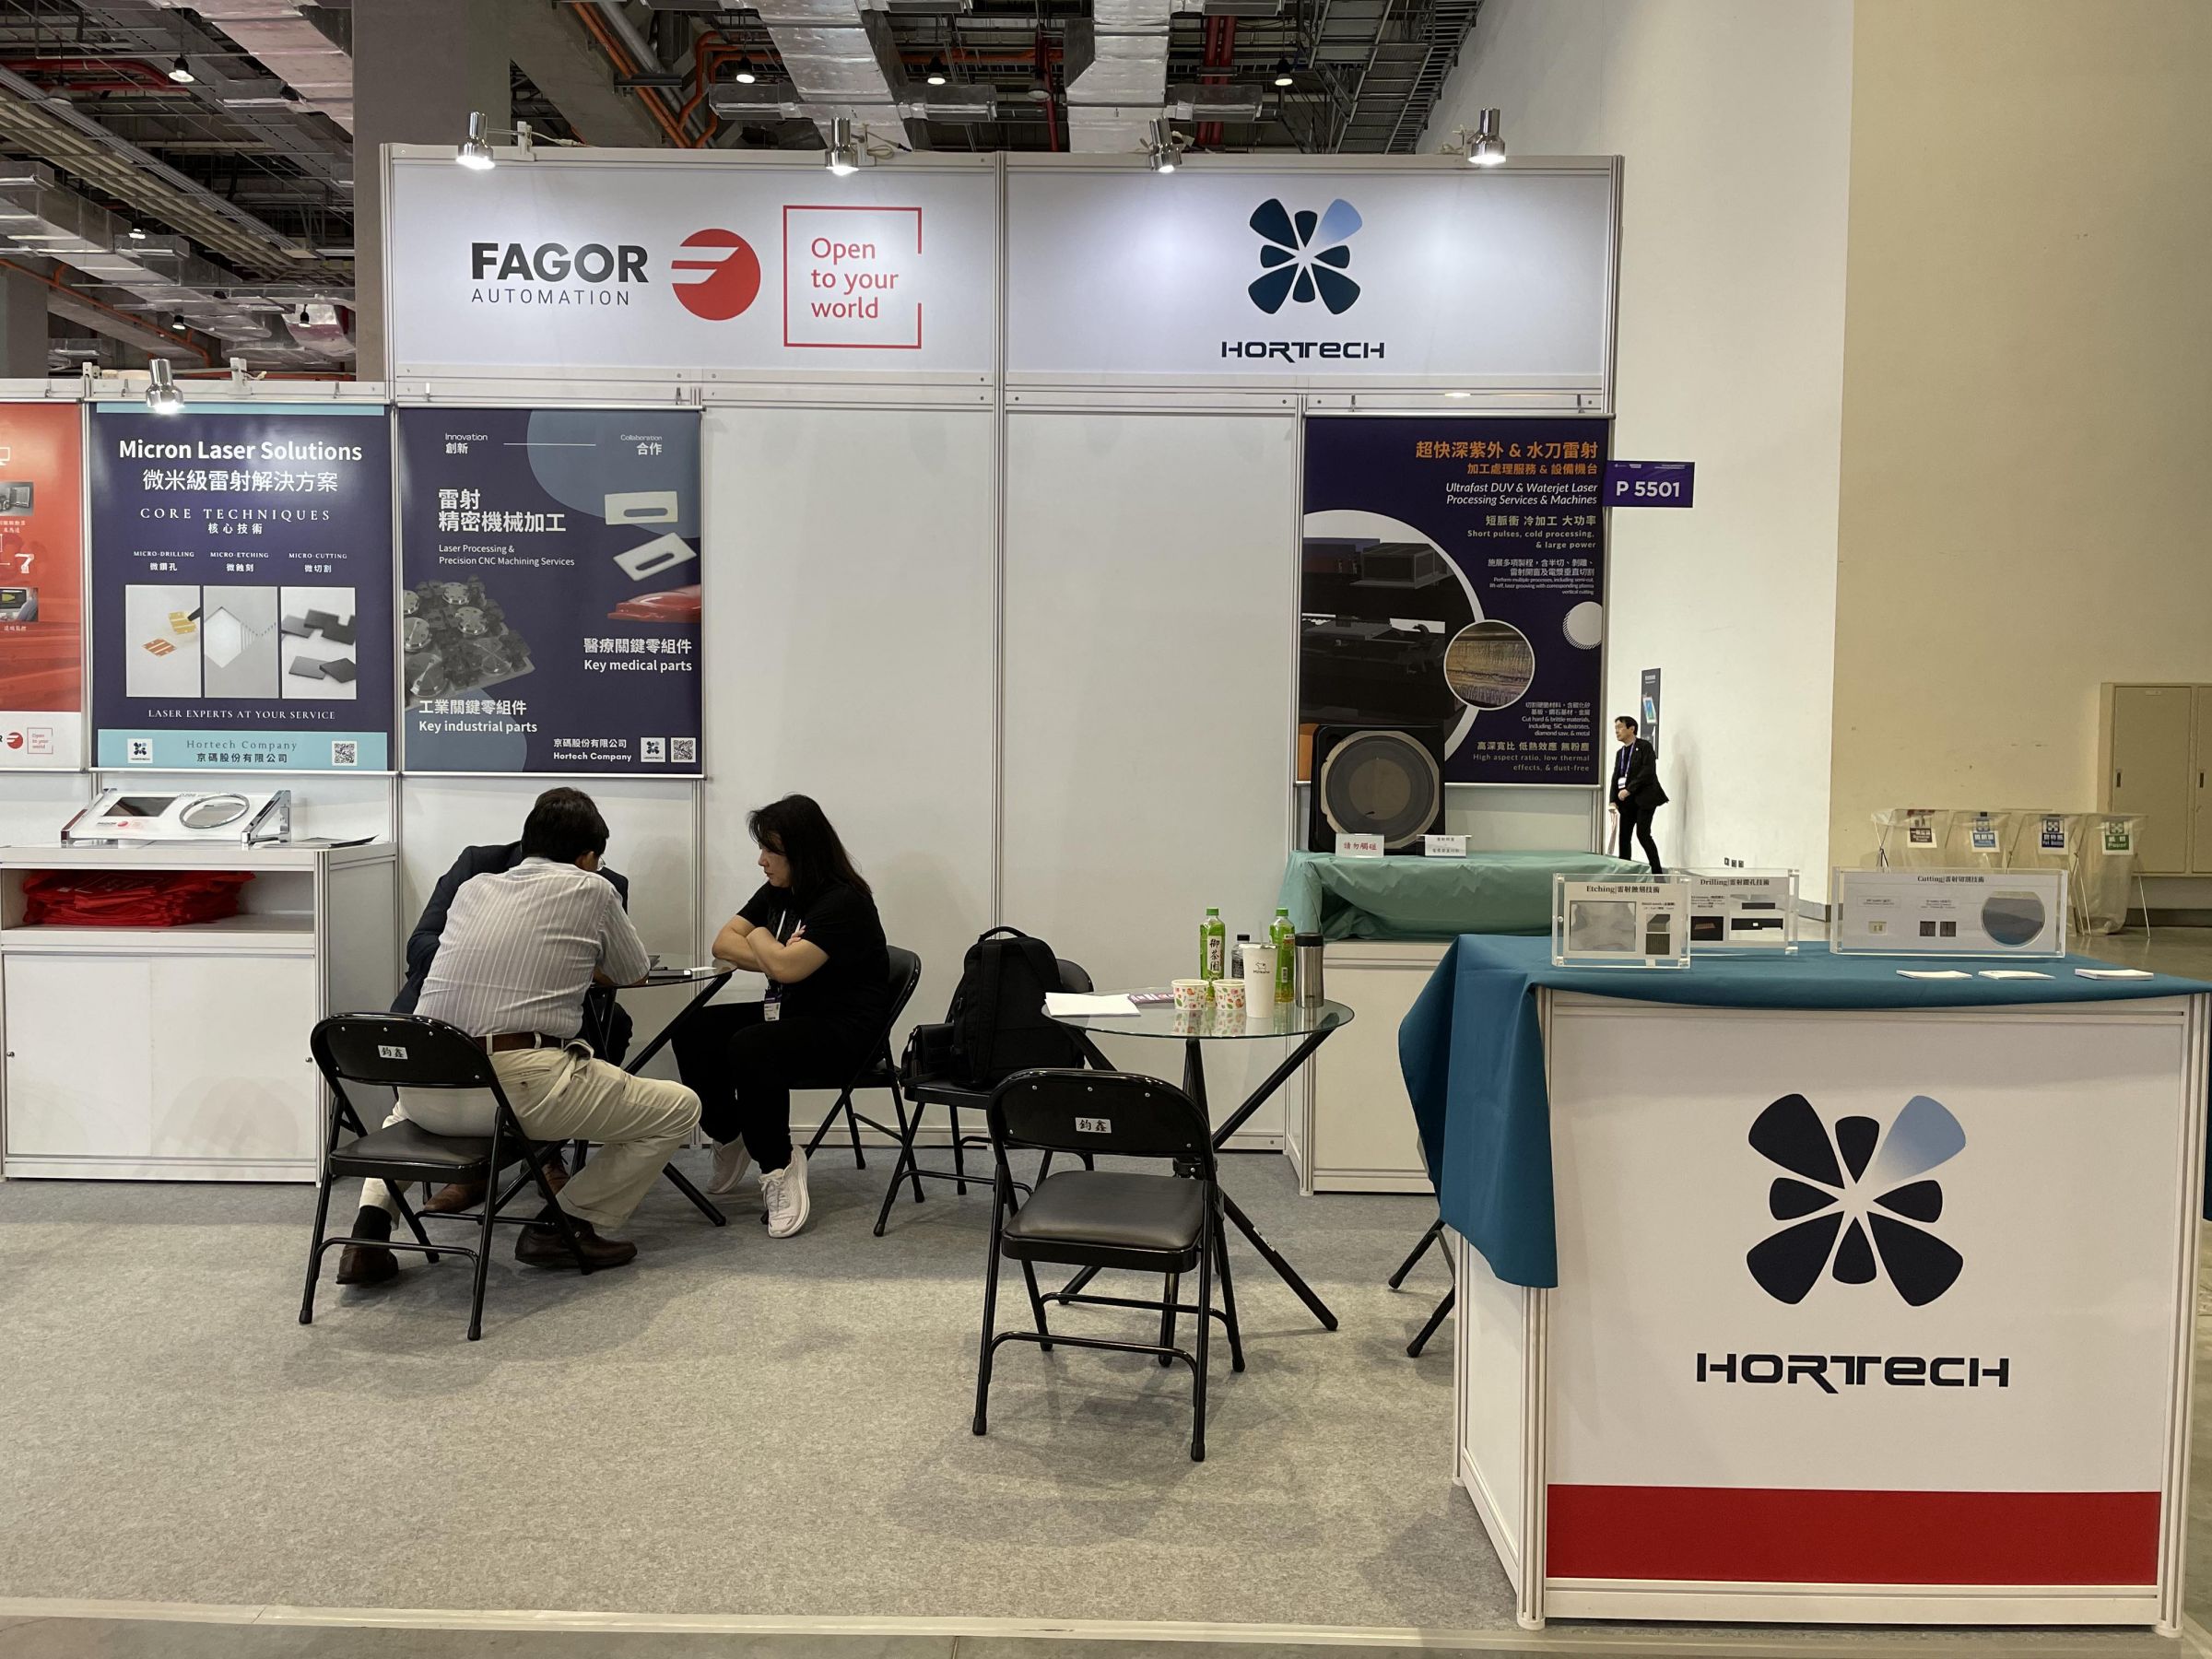 Hortech Company
Stand: P5501
Semicon Taiwan, TaiNEX 1 & 2
06-08 settembre 2023